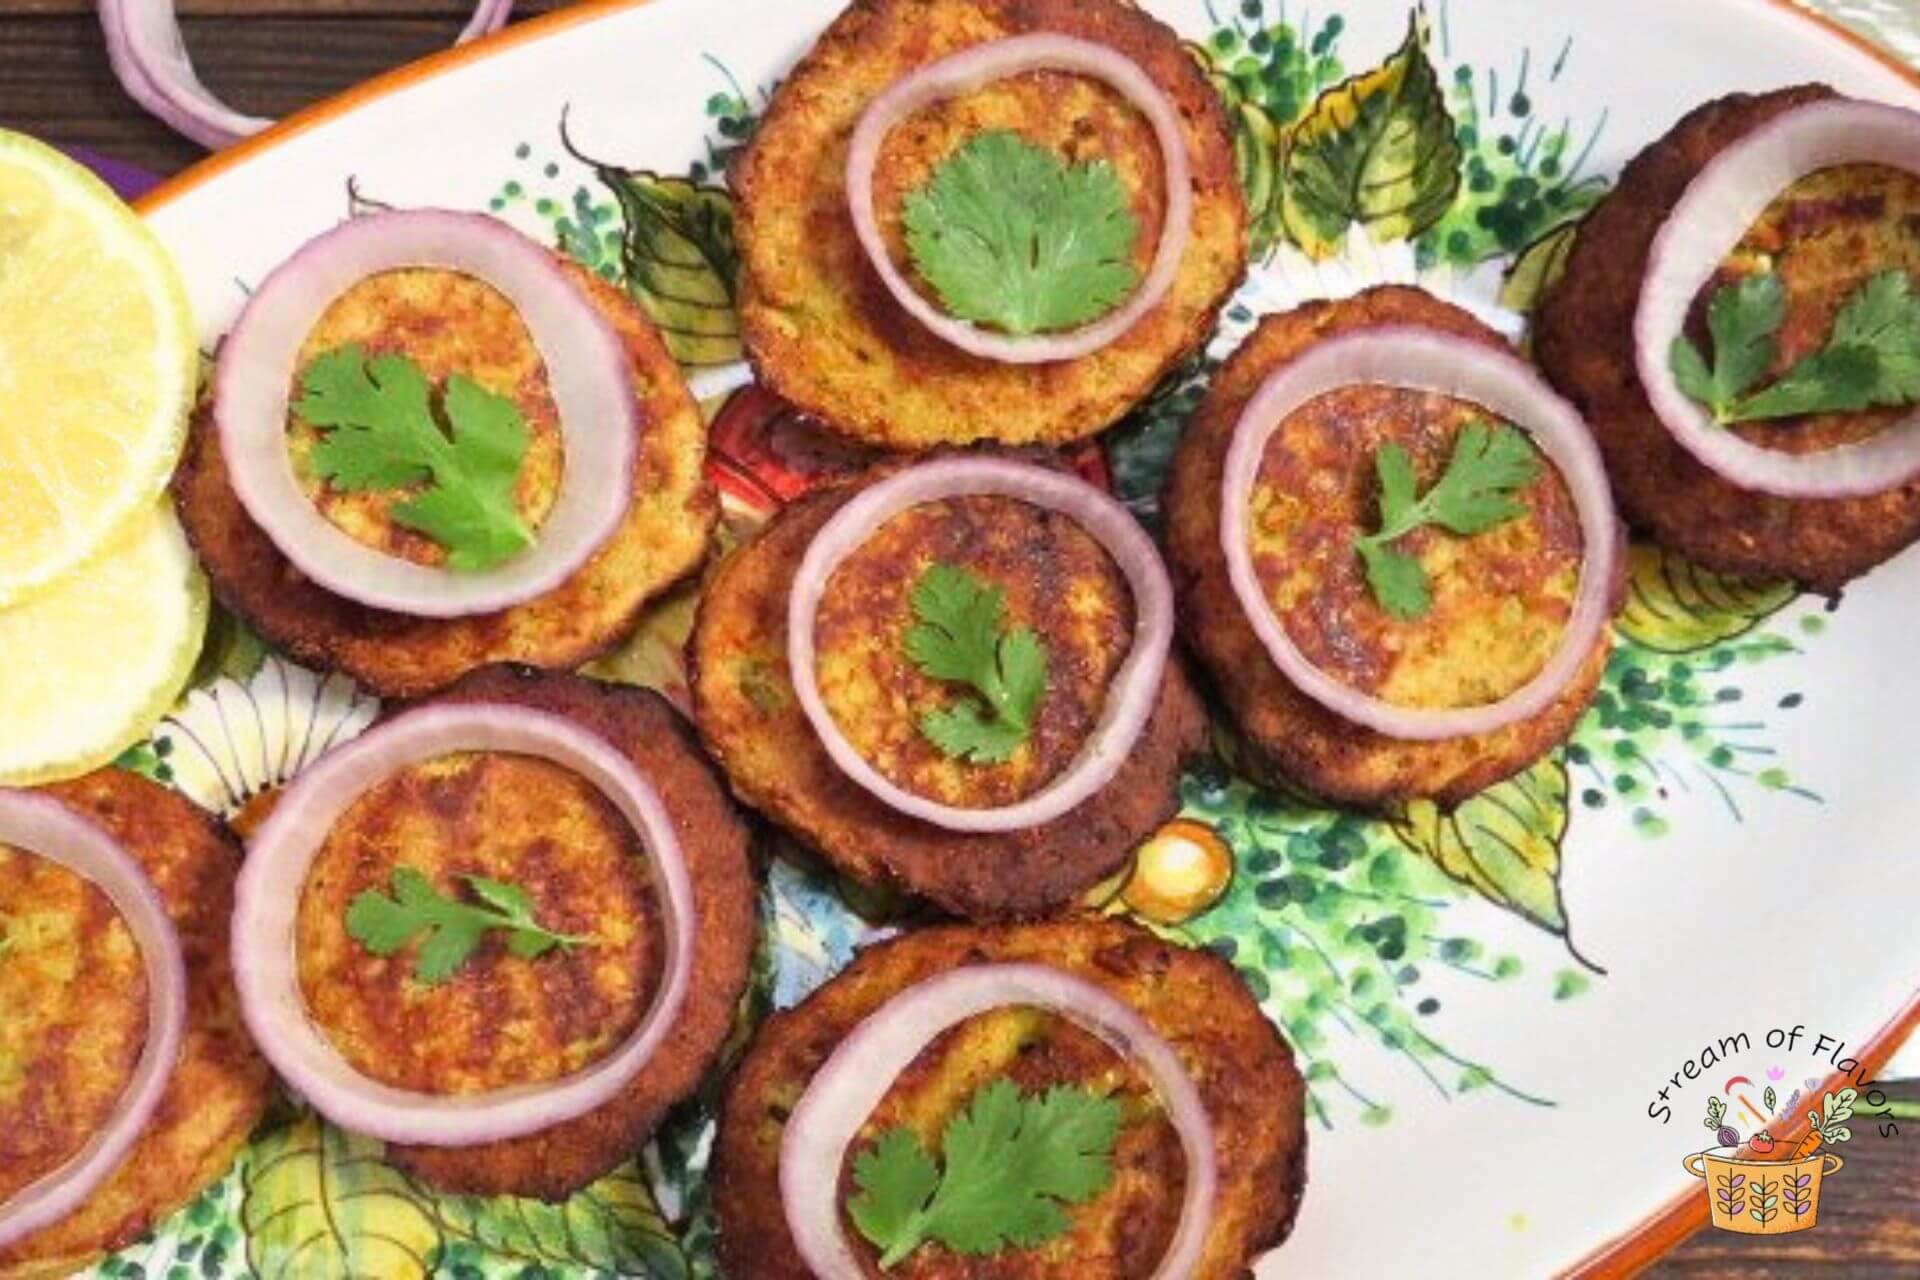 chicken galouti kebab with onion rings